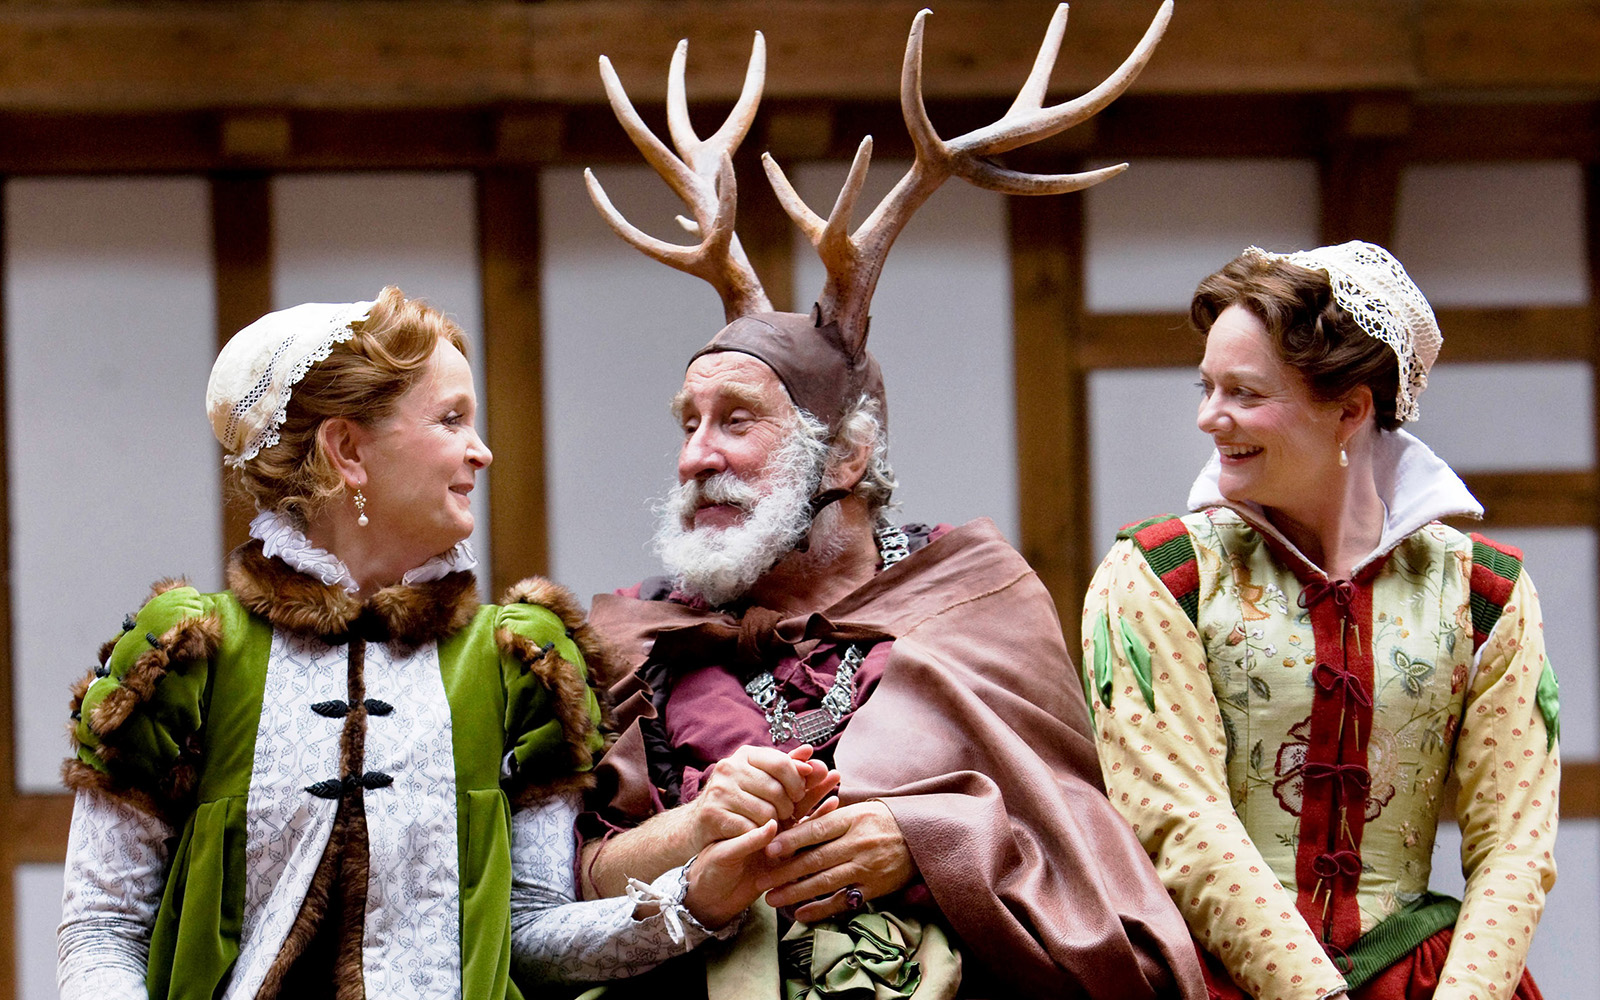 A man with a bushy white beard and antlers atop his head, sits inbetween to women wearing traditional Elizabethan dresses, who are laughing and smiling.